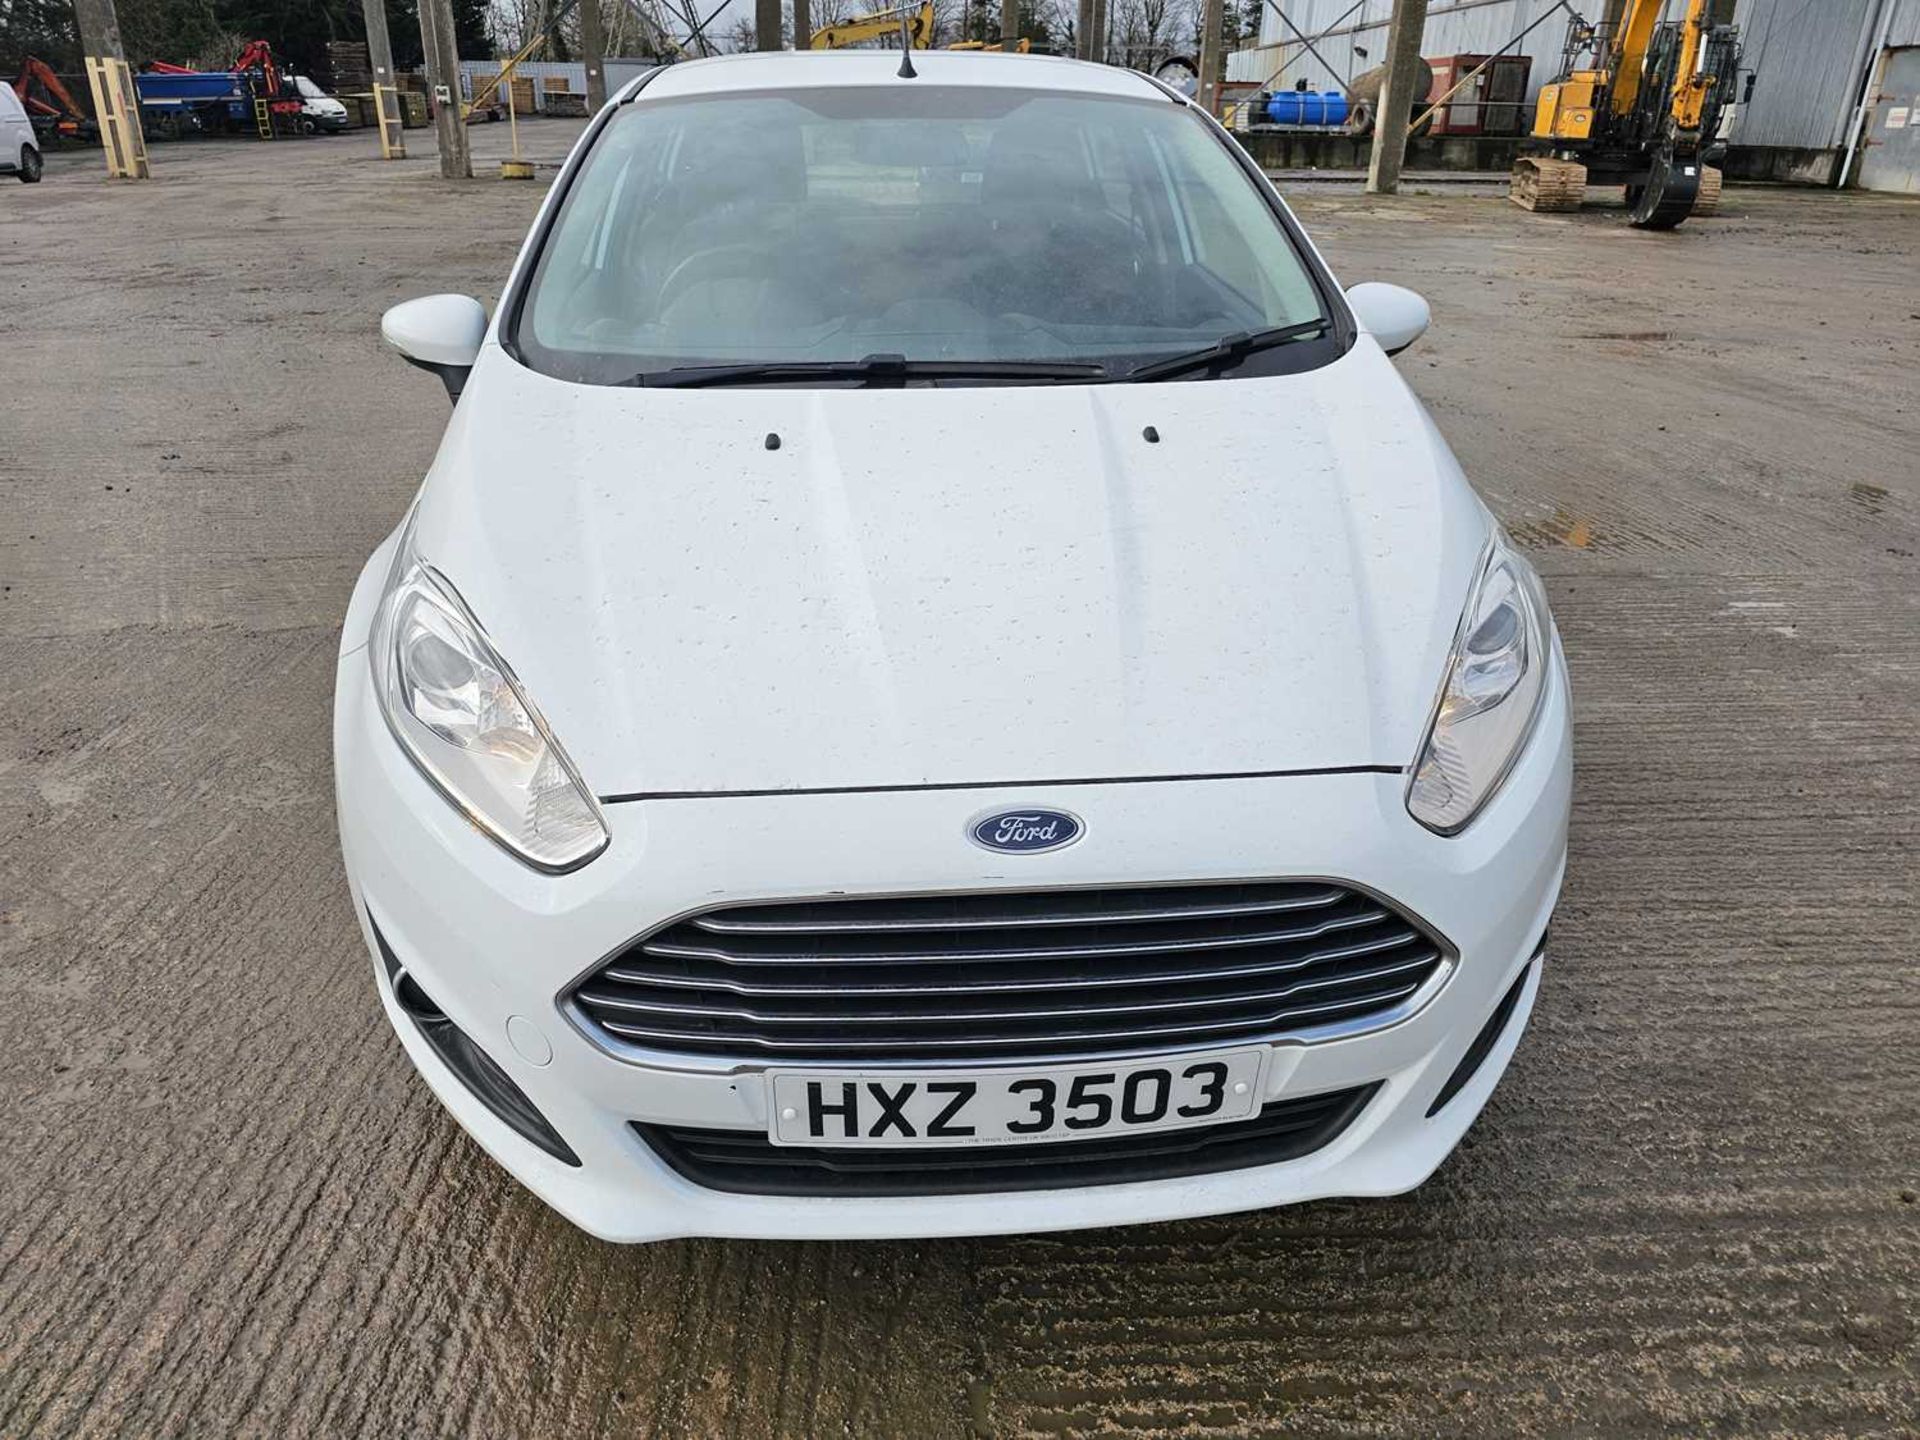 2015 Ford Fiesta, 5 Speed, Bluetooth, A/C (Reg. Docs. & Service History Available, Tested 01/25) - Image 5 of 28